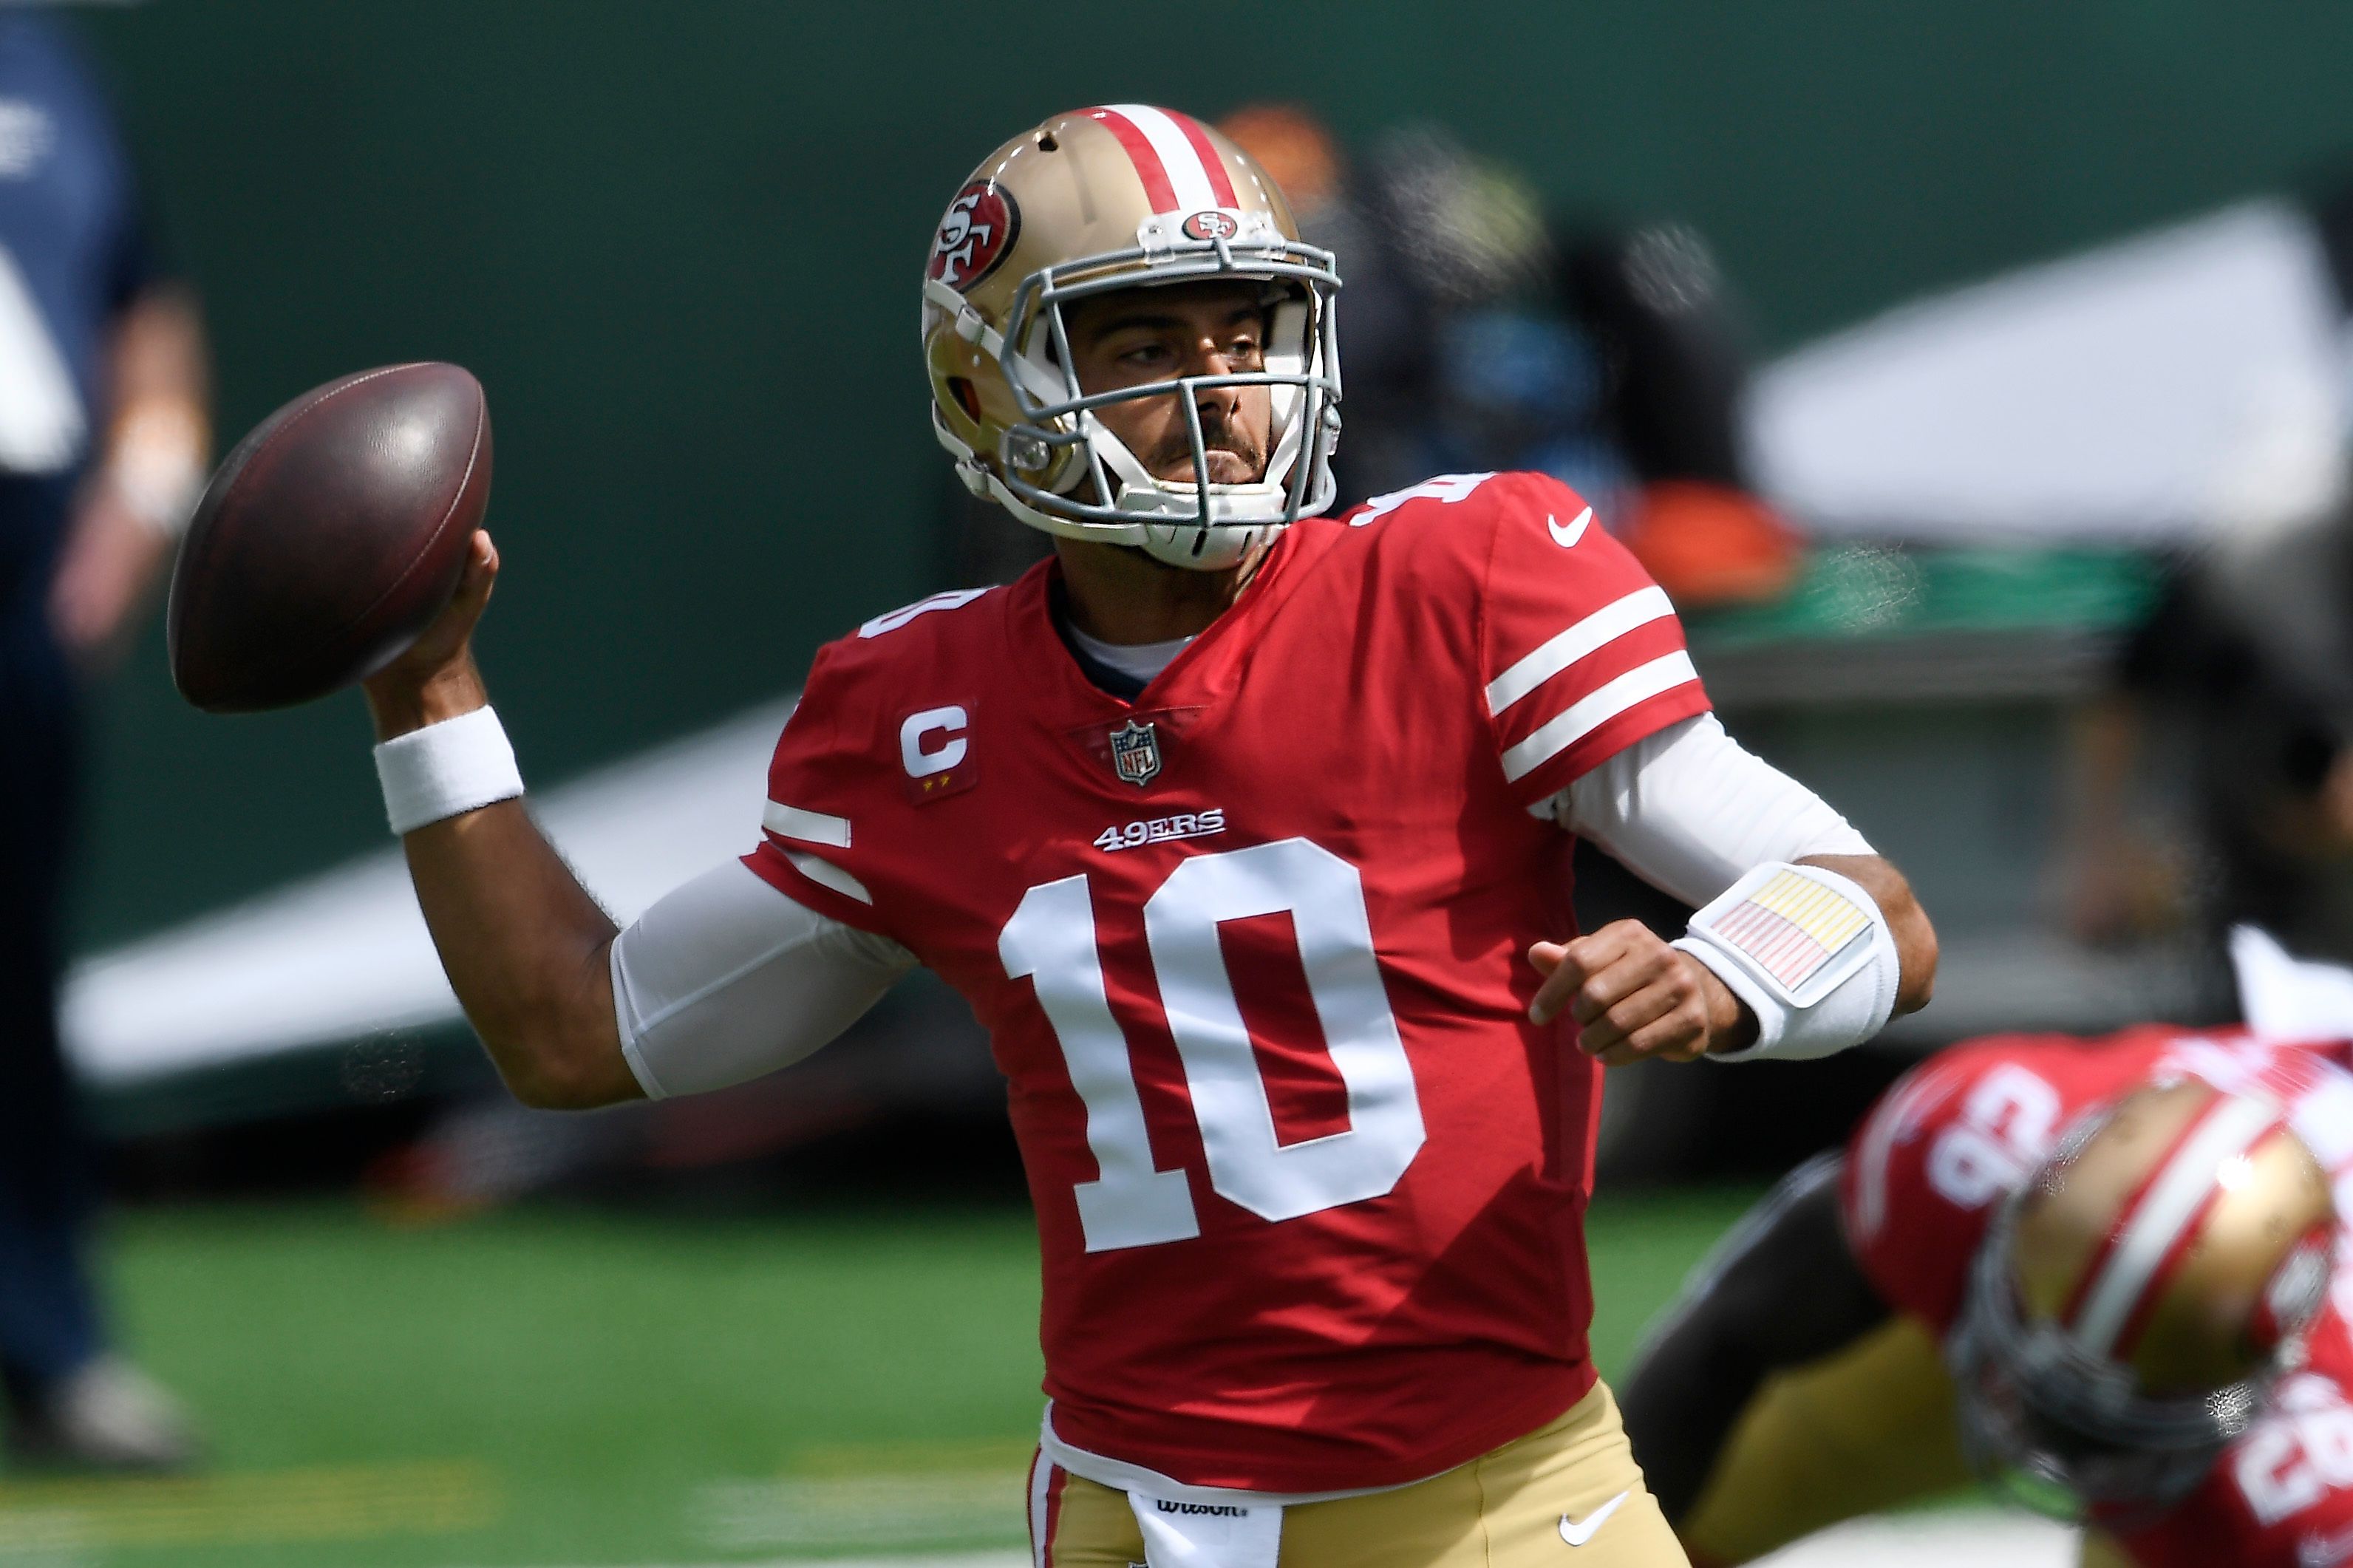 Jimmy Garoppolo throws a pass in an NFL game.